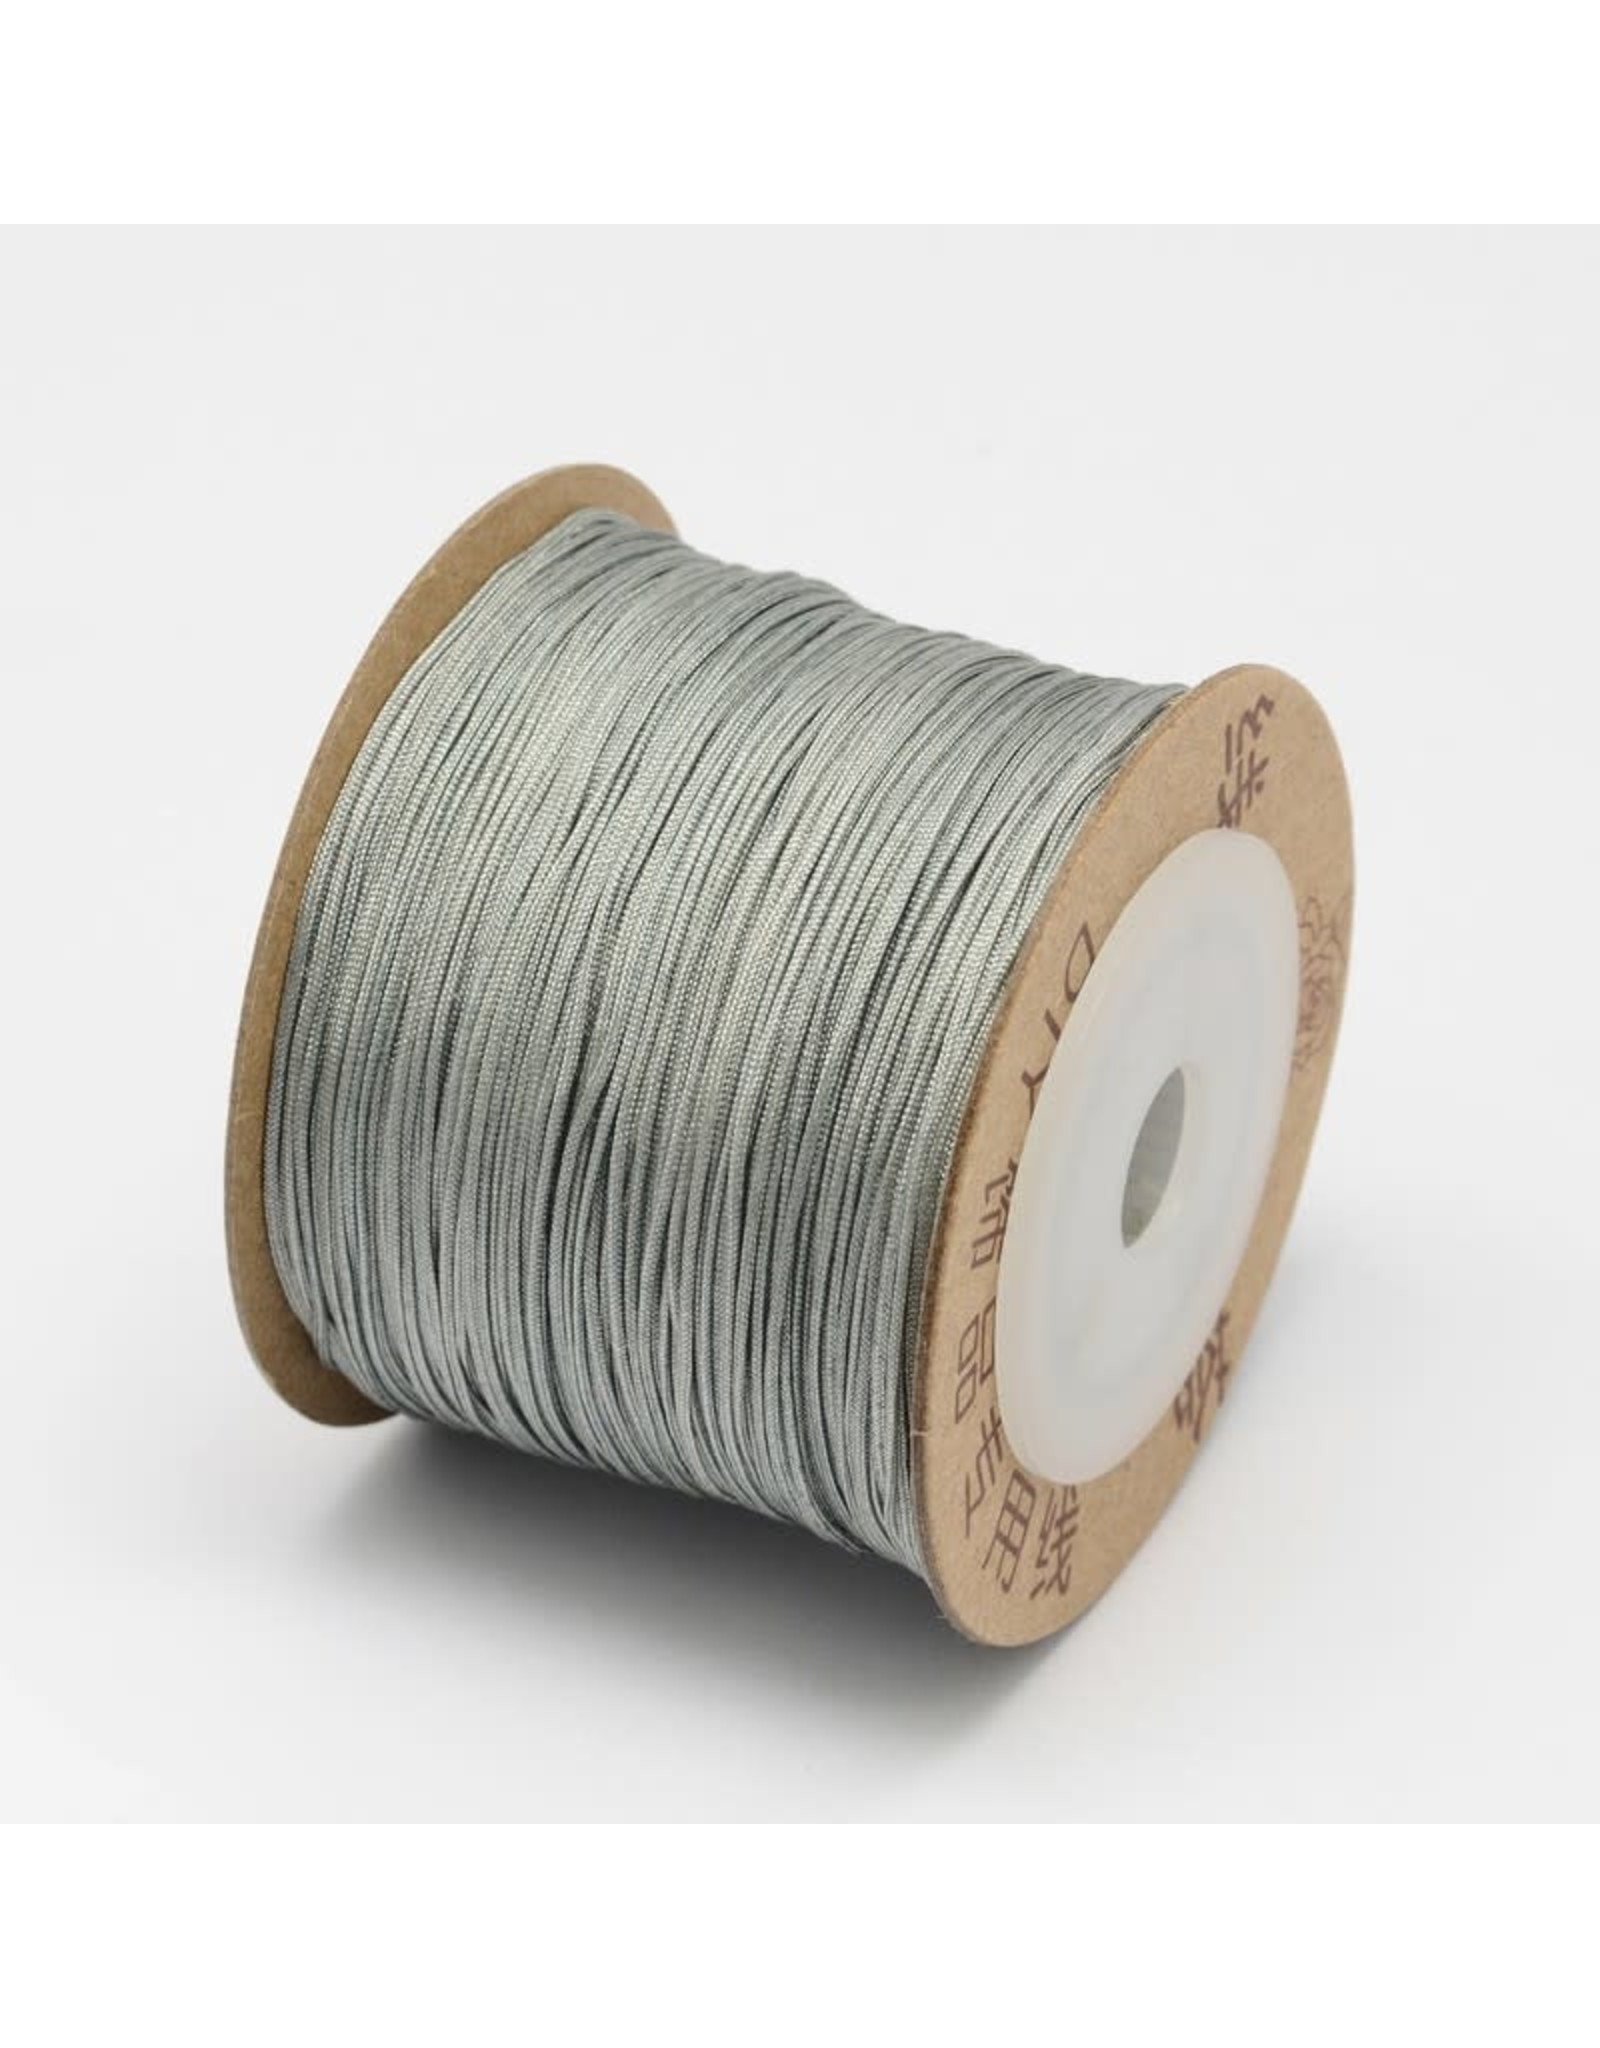 Chinese Knotting Cord .8mm Silver Grey x100m